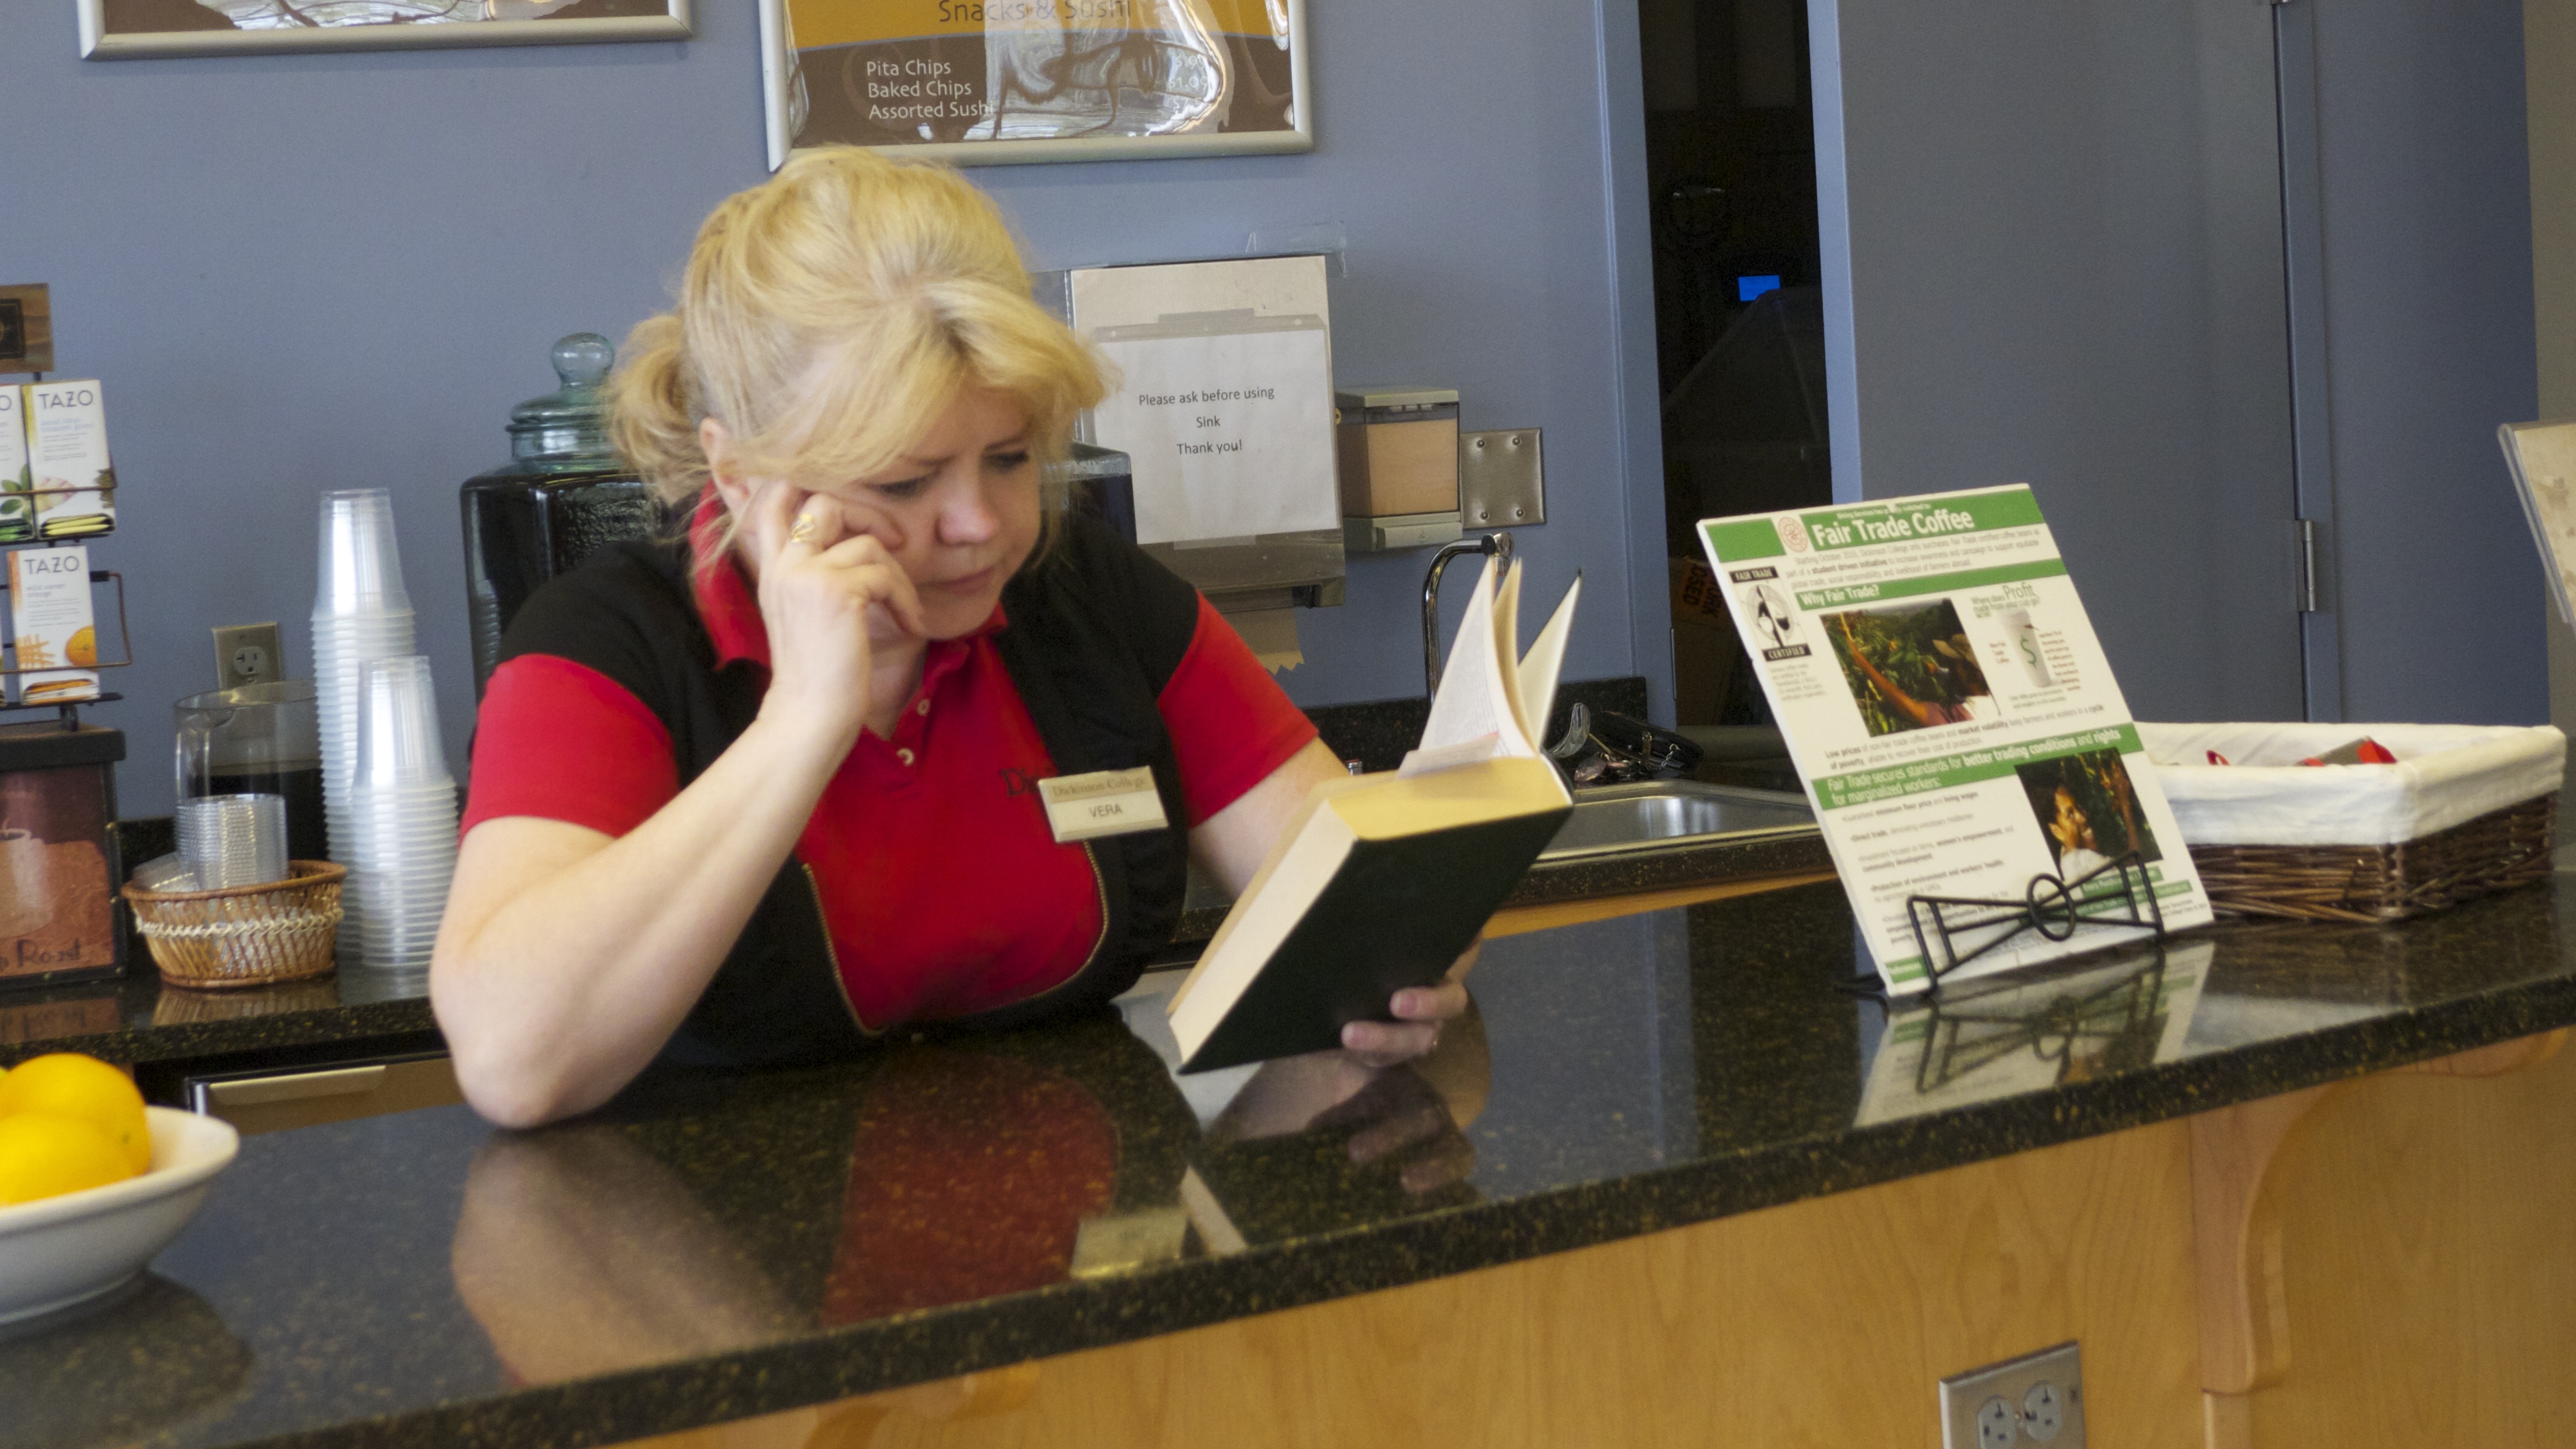 A Dining Services employee brushes up on her Russian Don Quixote at the Biblio Café.